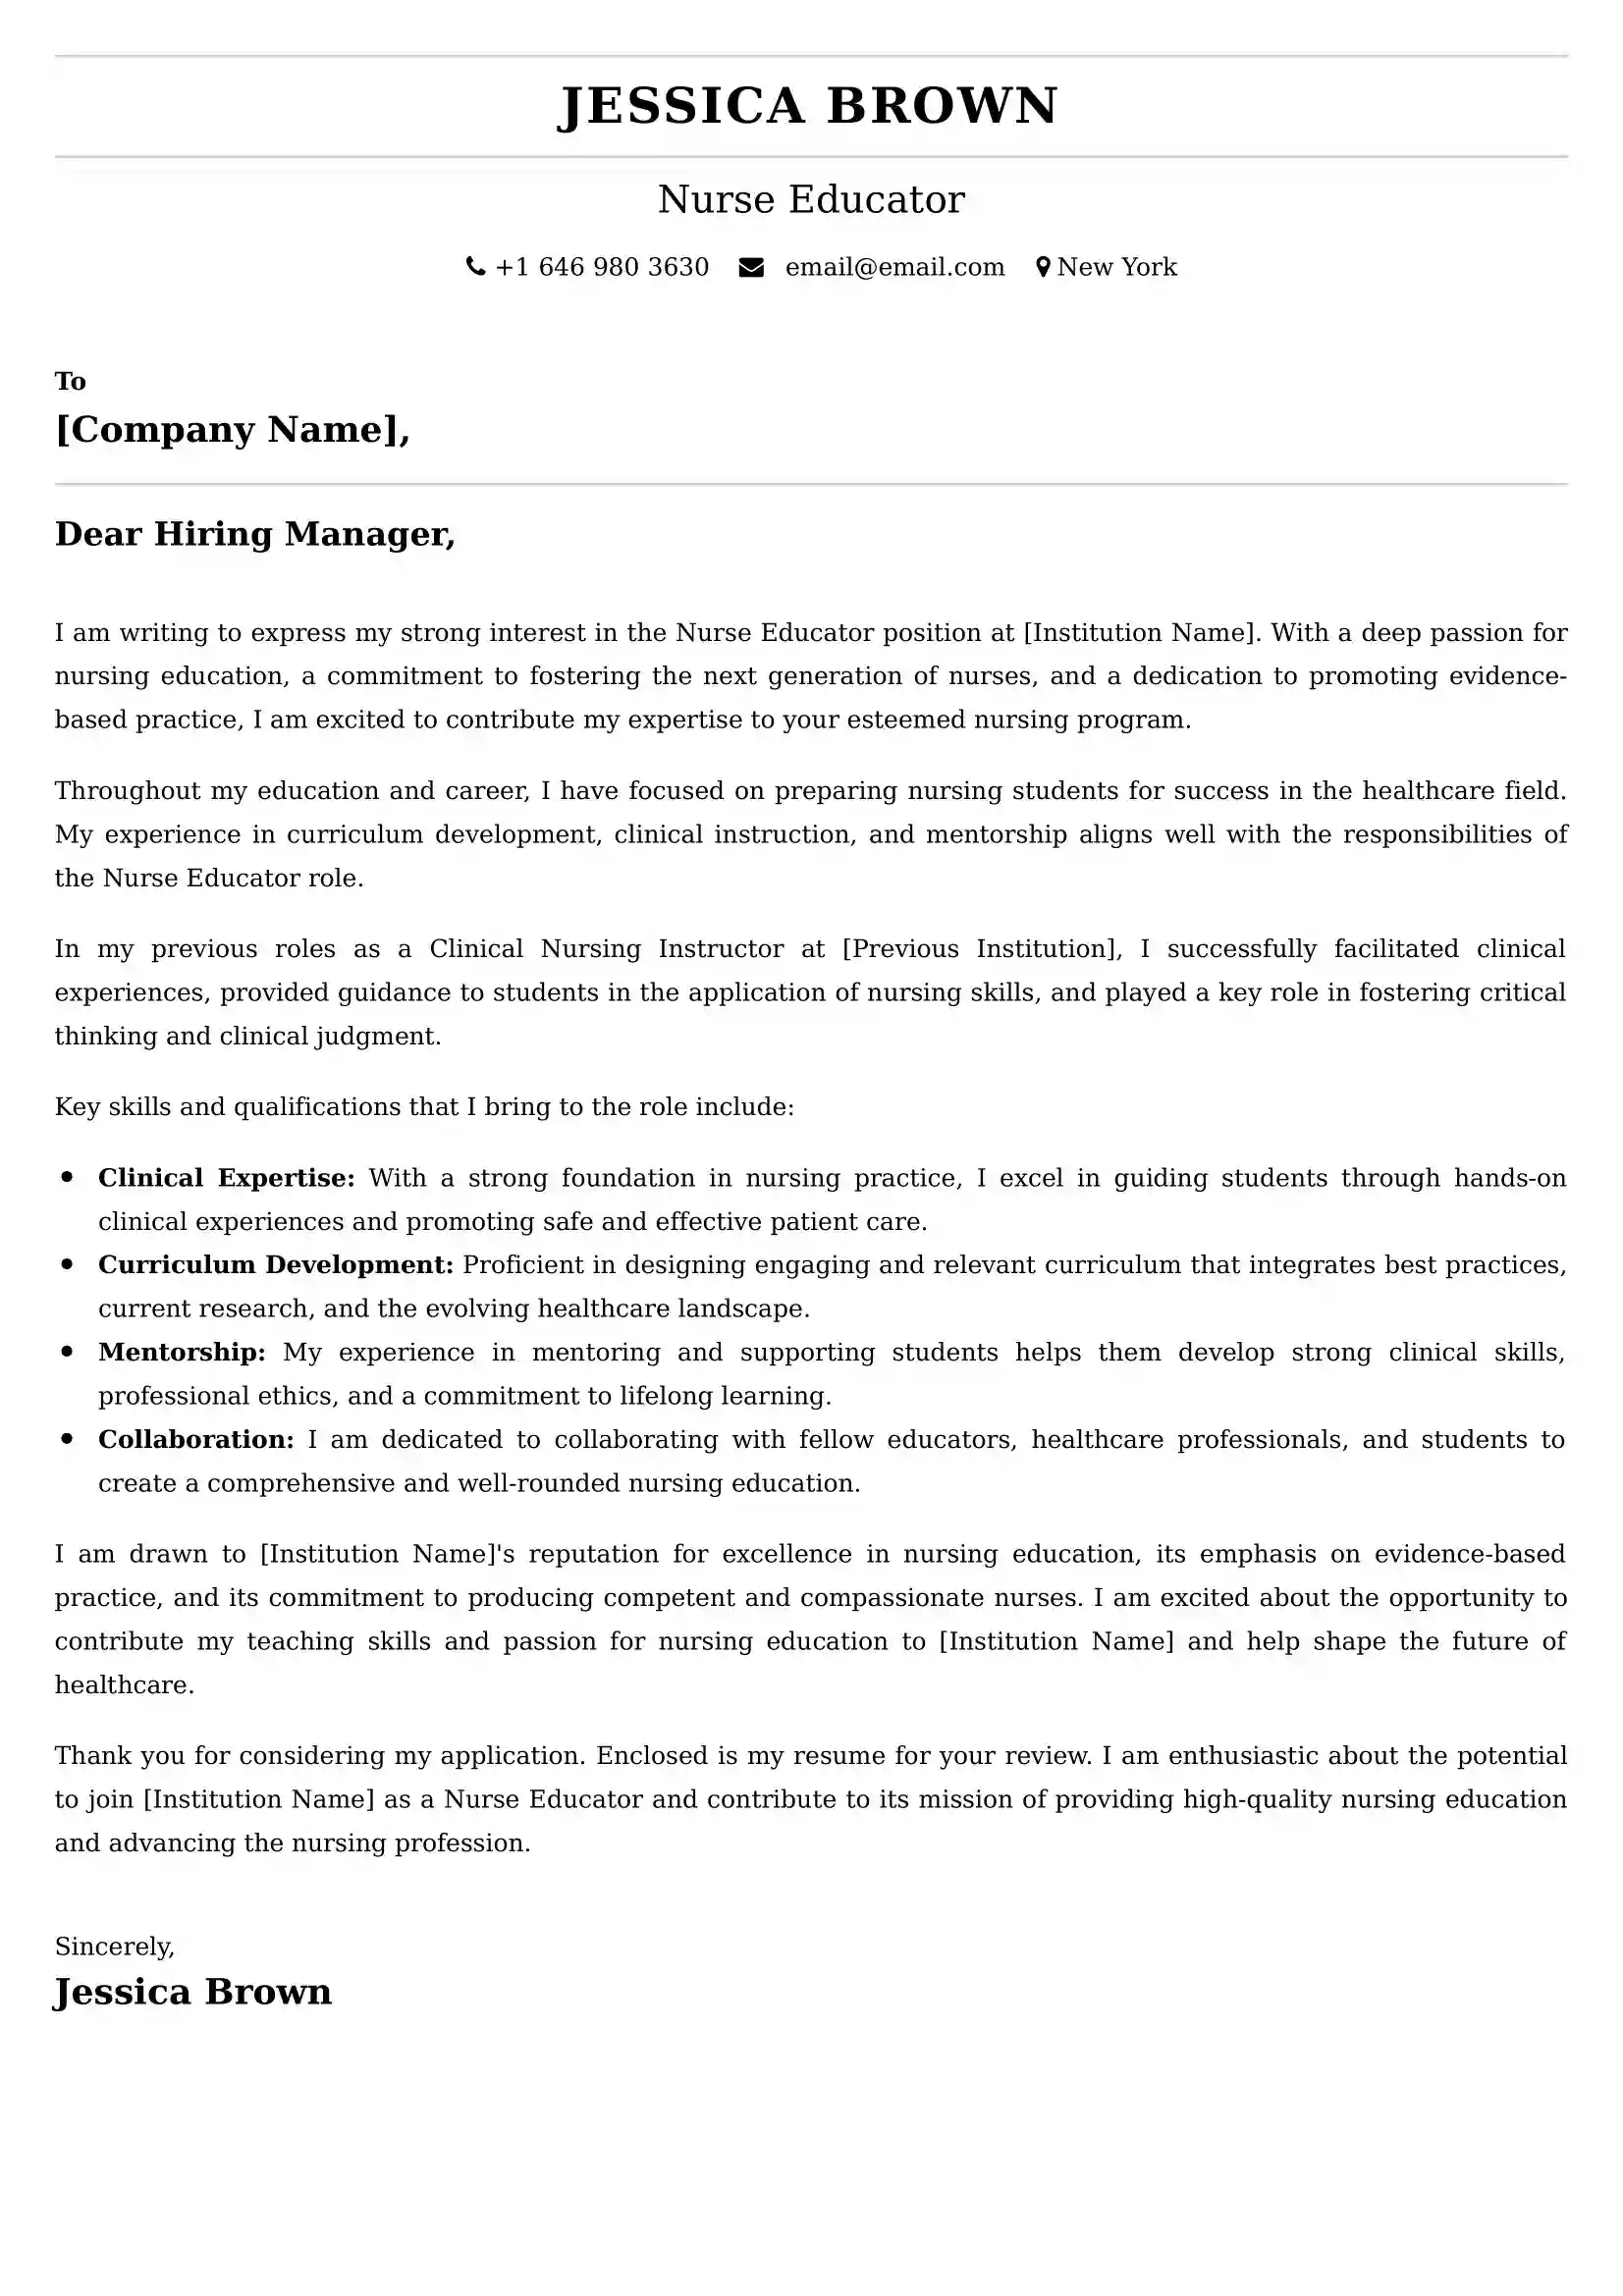 Nurse Educator Cover Letter Examples India